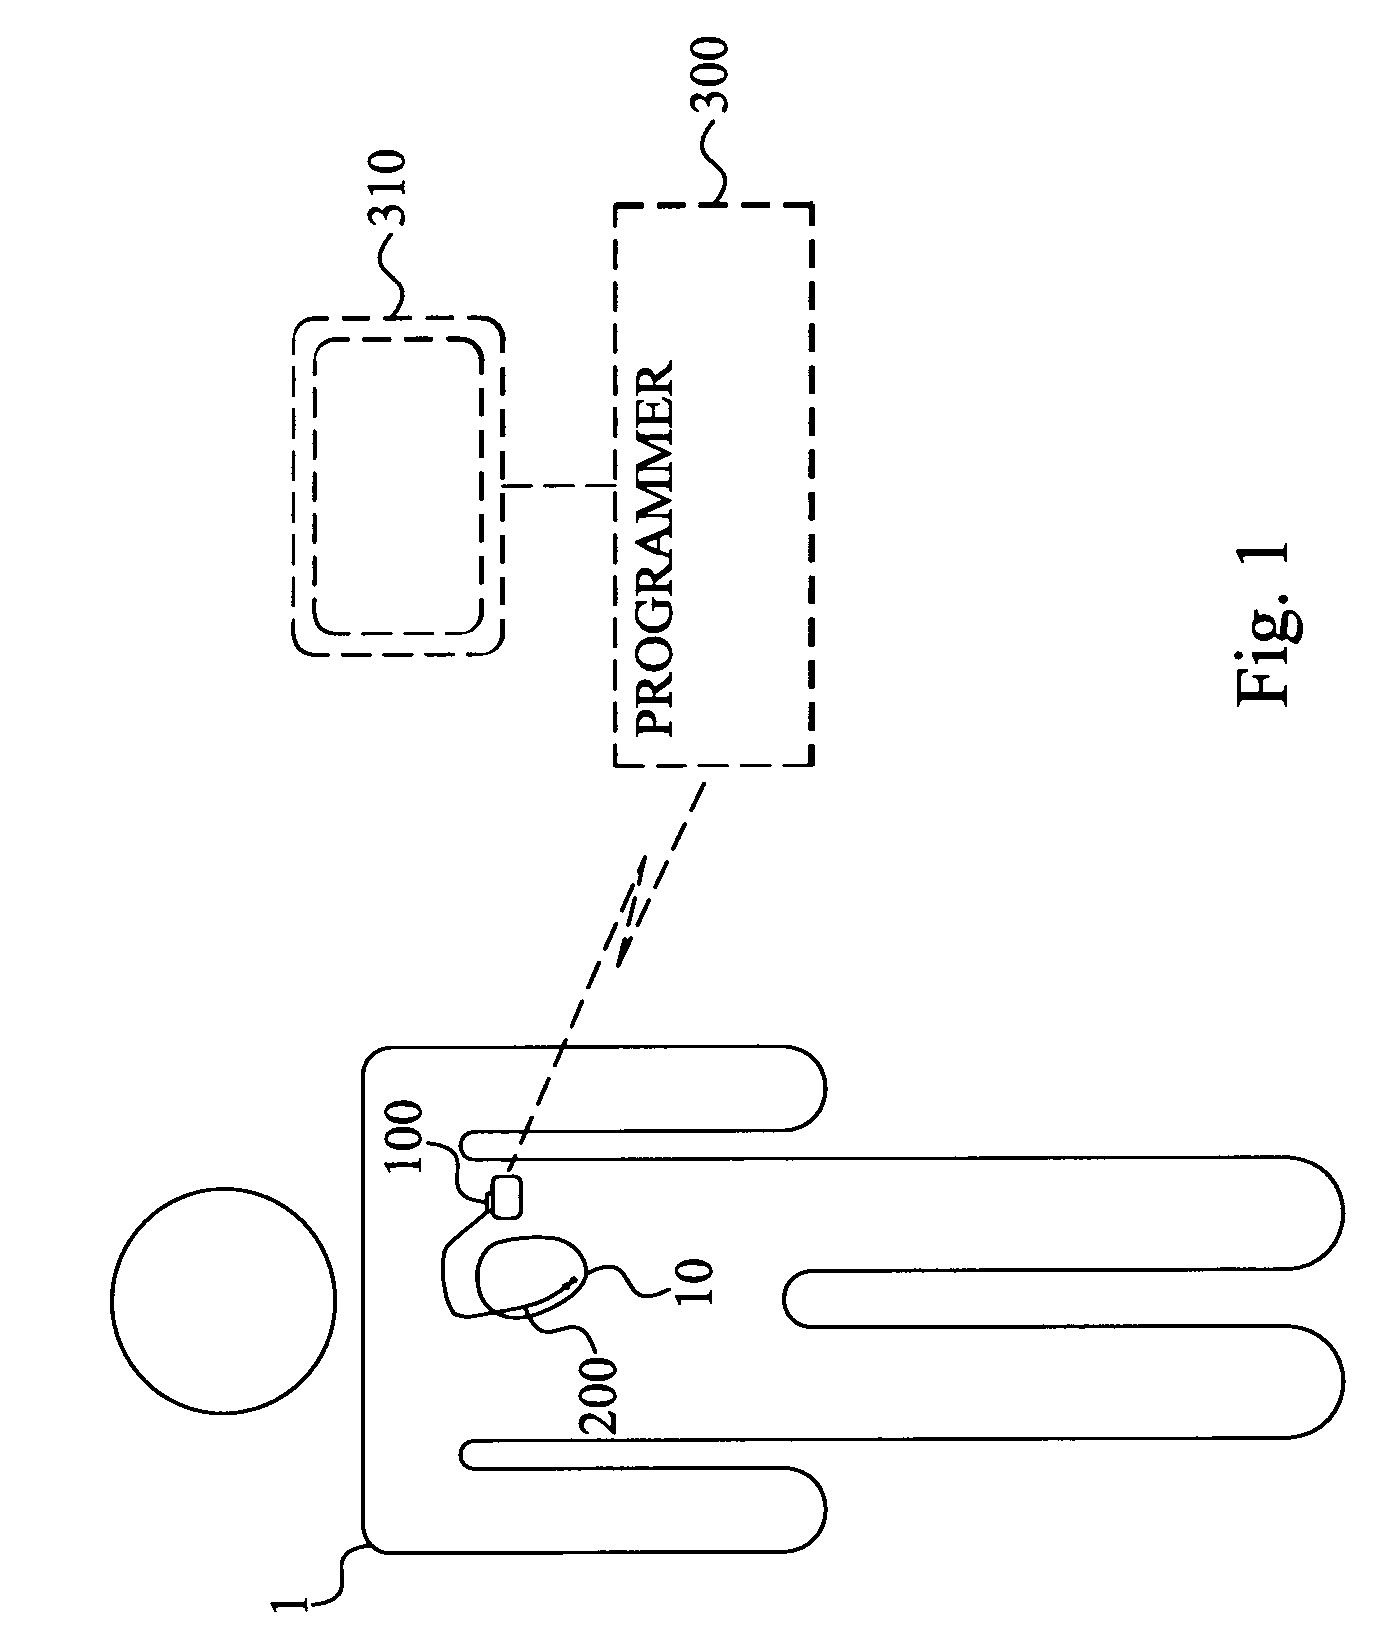 Method and device for monitoring acute decompensated heart failure